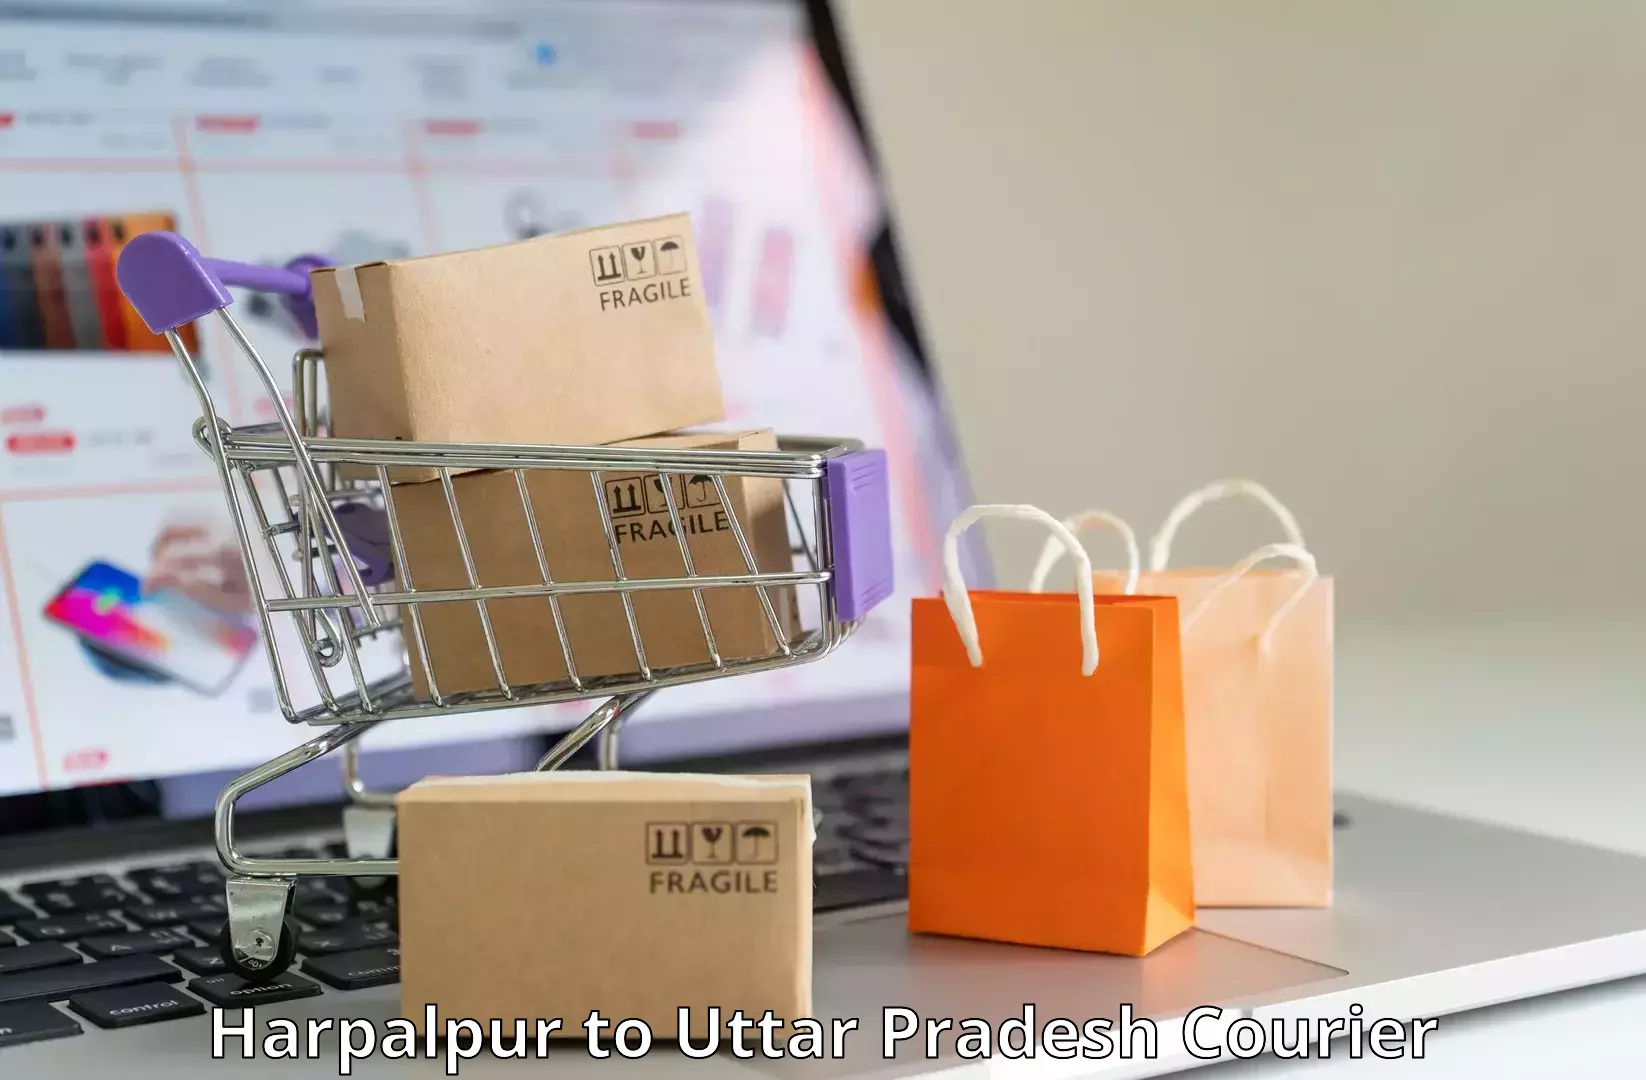 Easy access courier services in Harpalpur to Dataganj